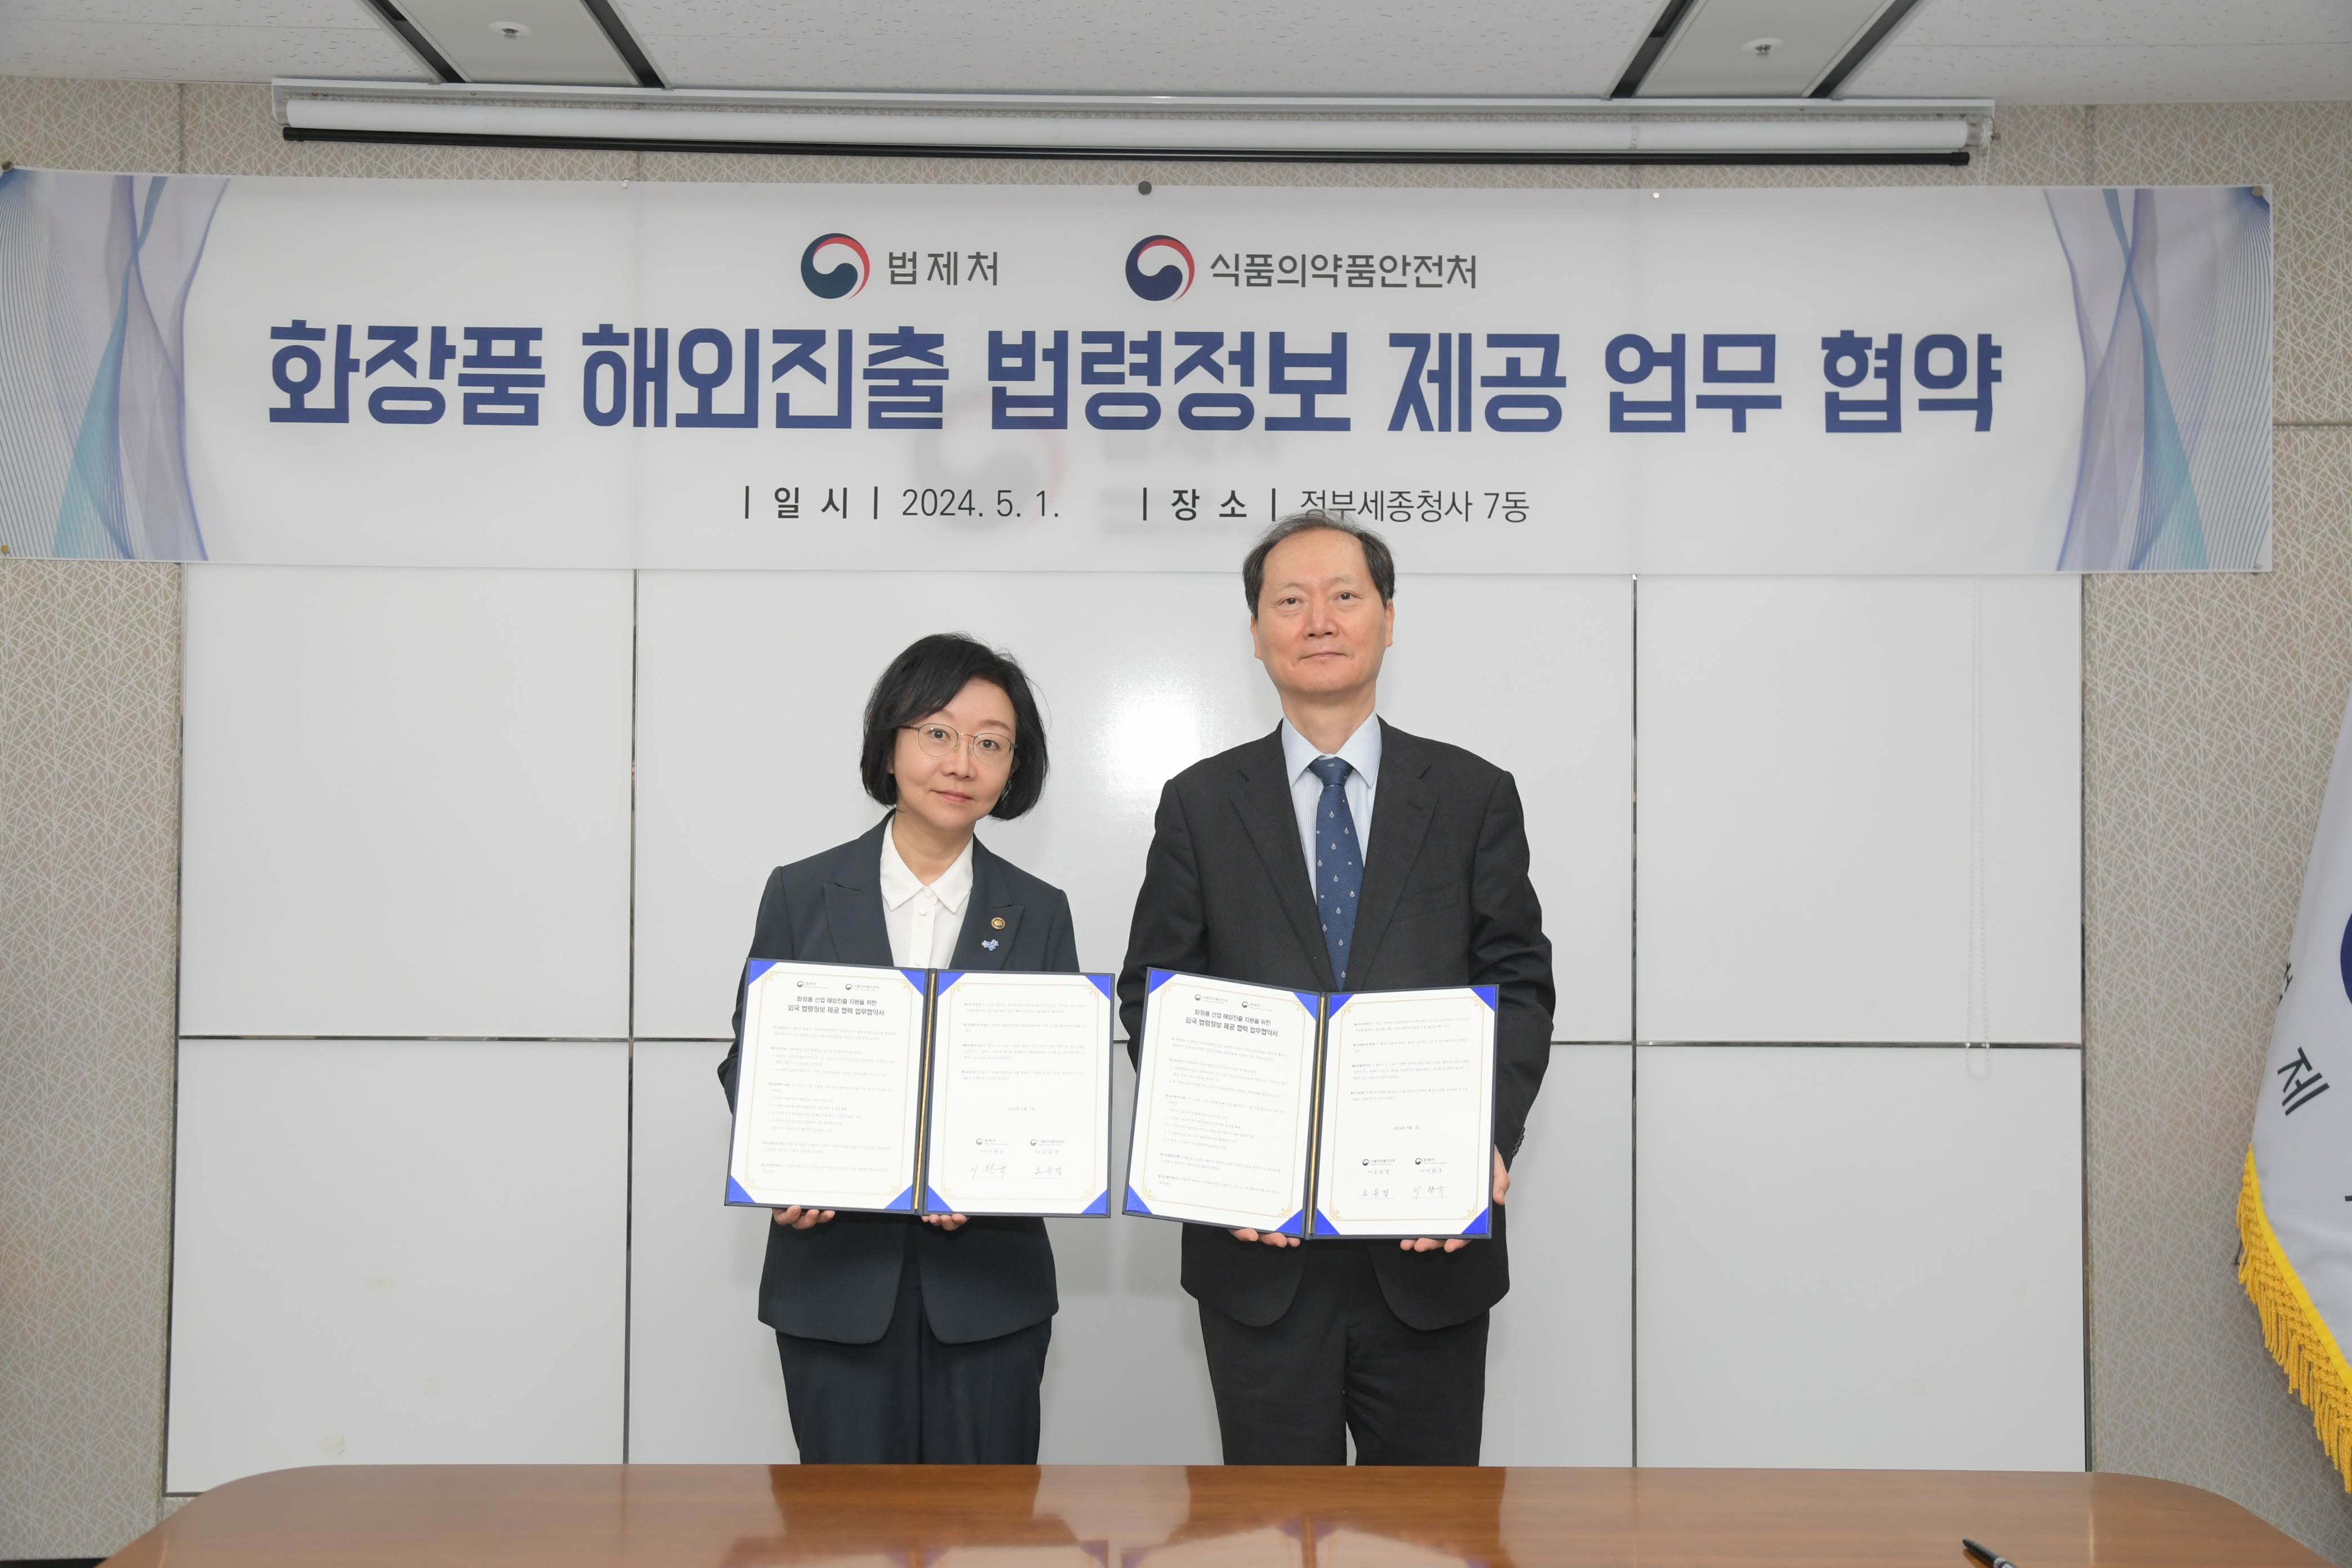 Photo News4 - Ministry of Food and Drug Safety and Ministry of Government Legislation, signing ceremony for ‘Agreement to provide legal information for overseas expansion of cosmetics’